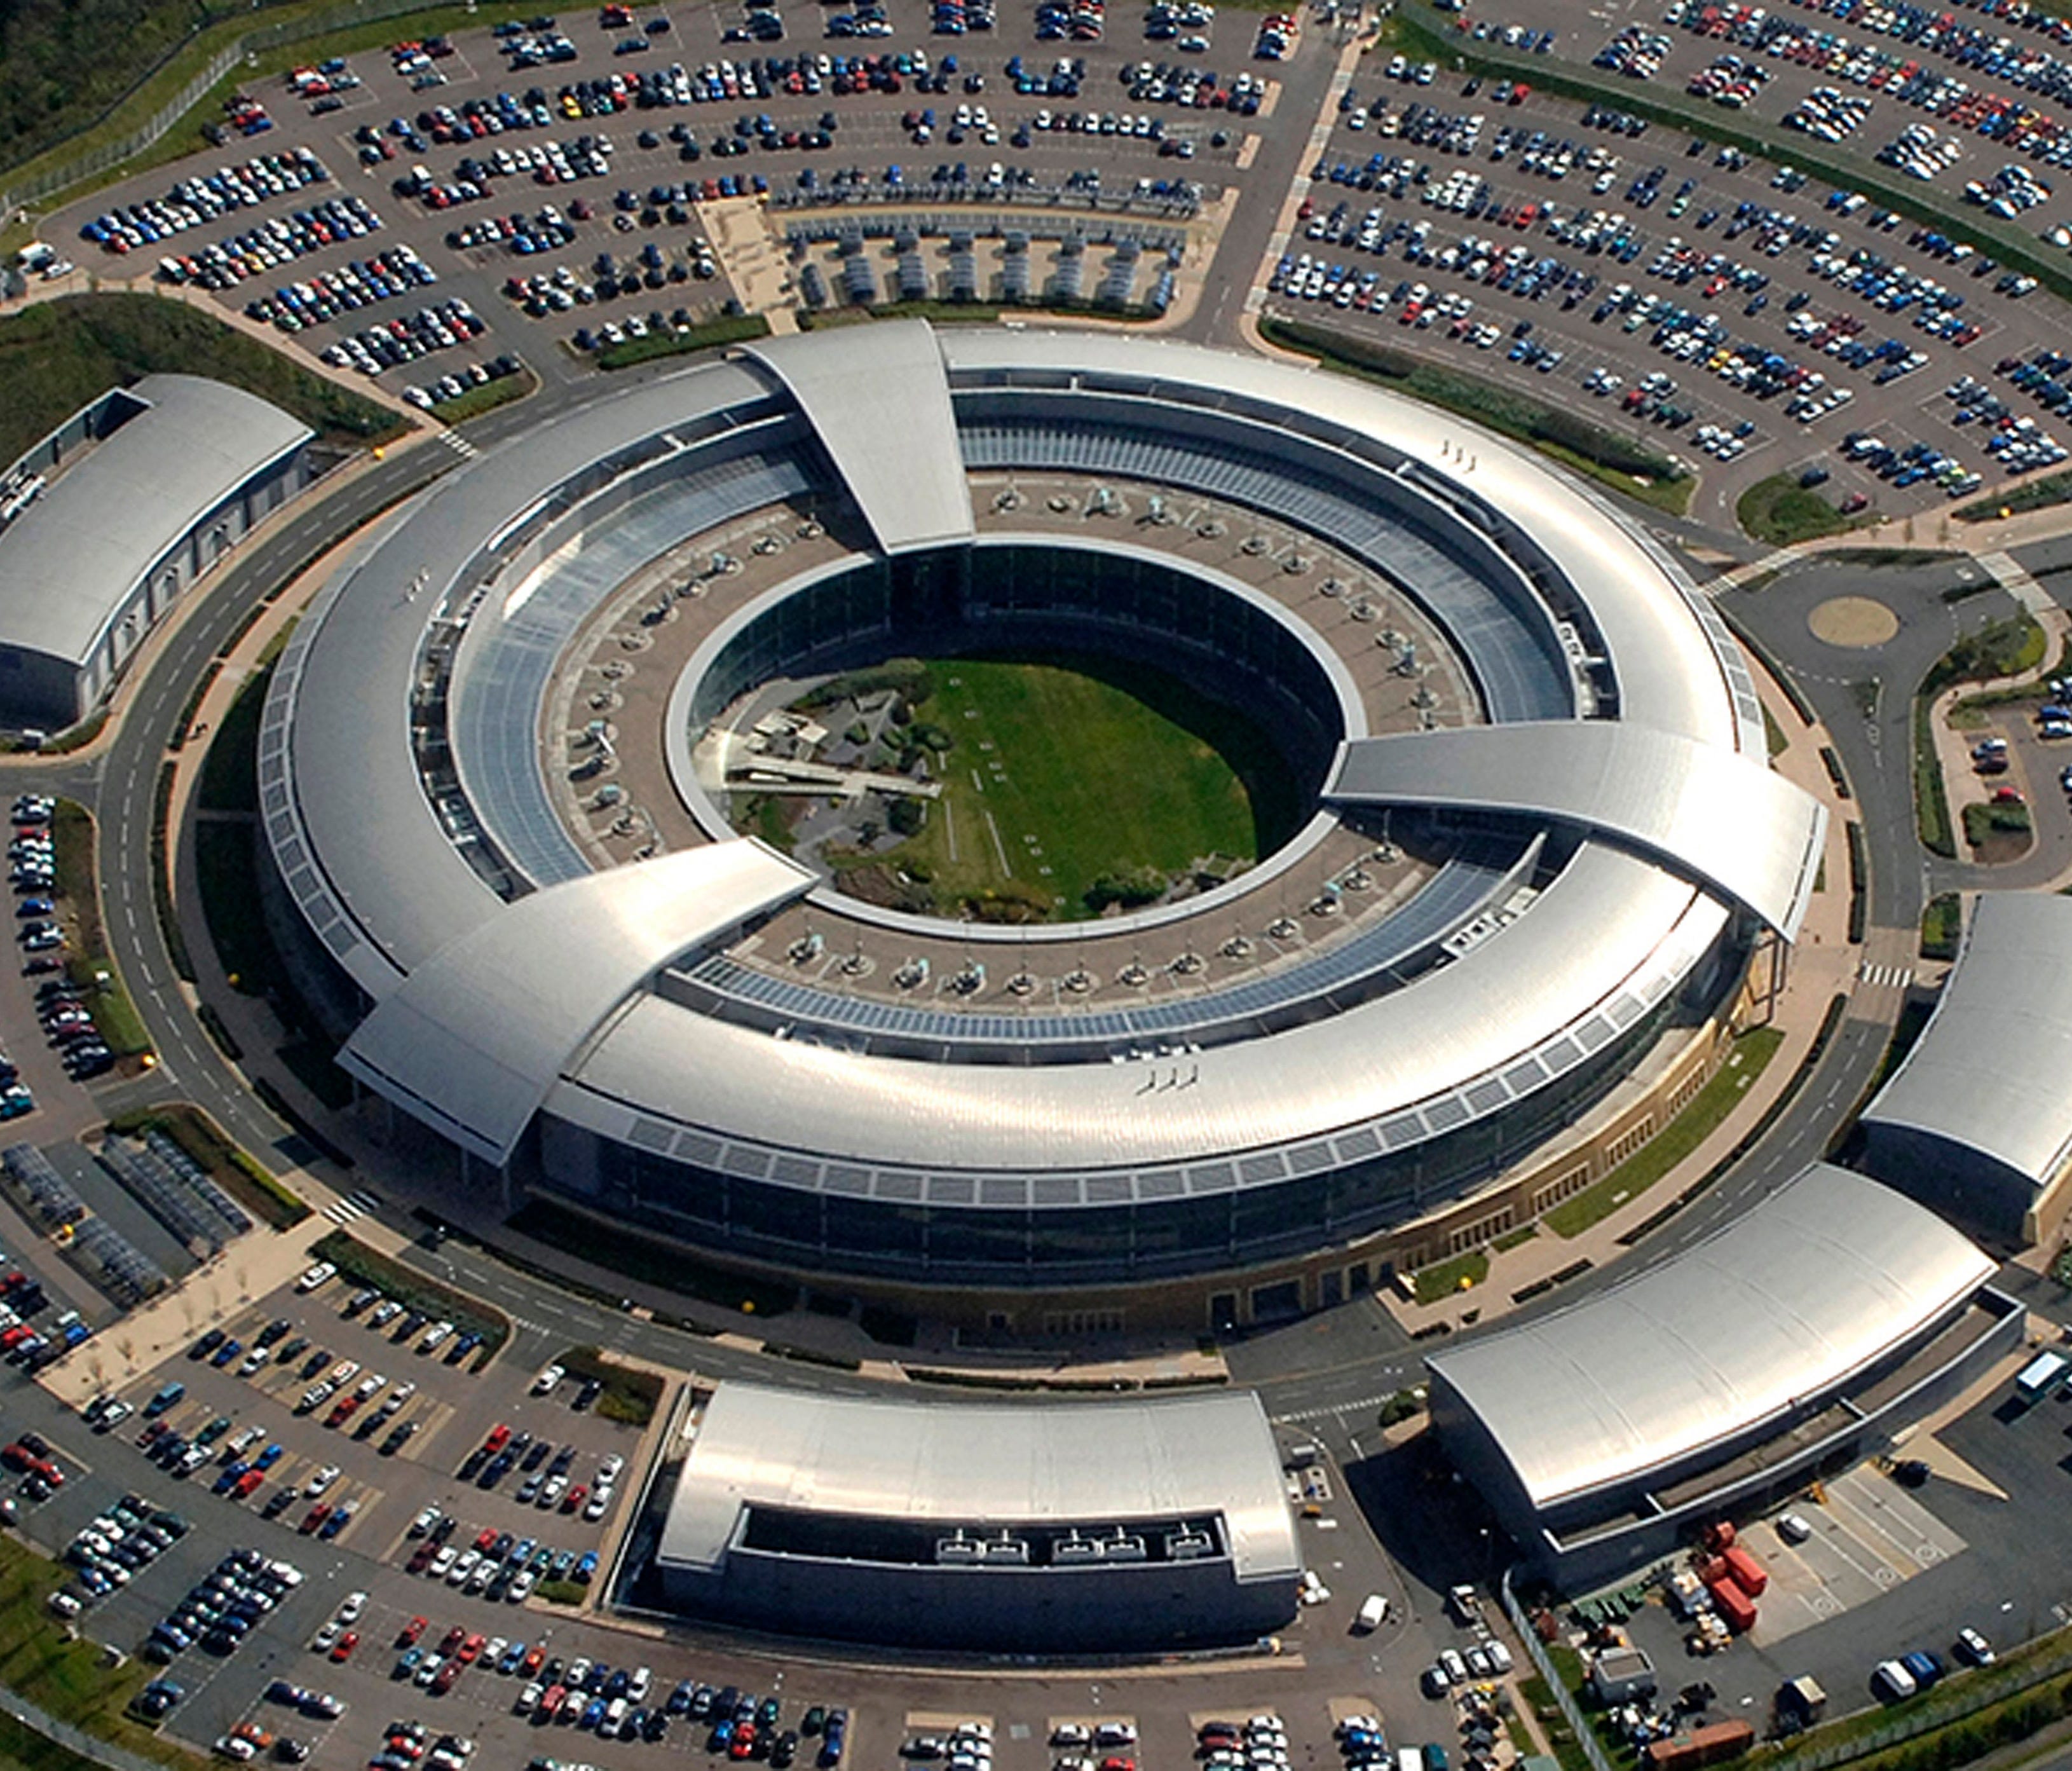 A handout photo made available by British Government Communications Headquarters on March 17, 2017 shows the British Government's Communications Headquarters (GCHQ) in Cheltenham, Gloucestershire, Britain.